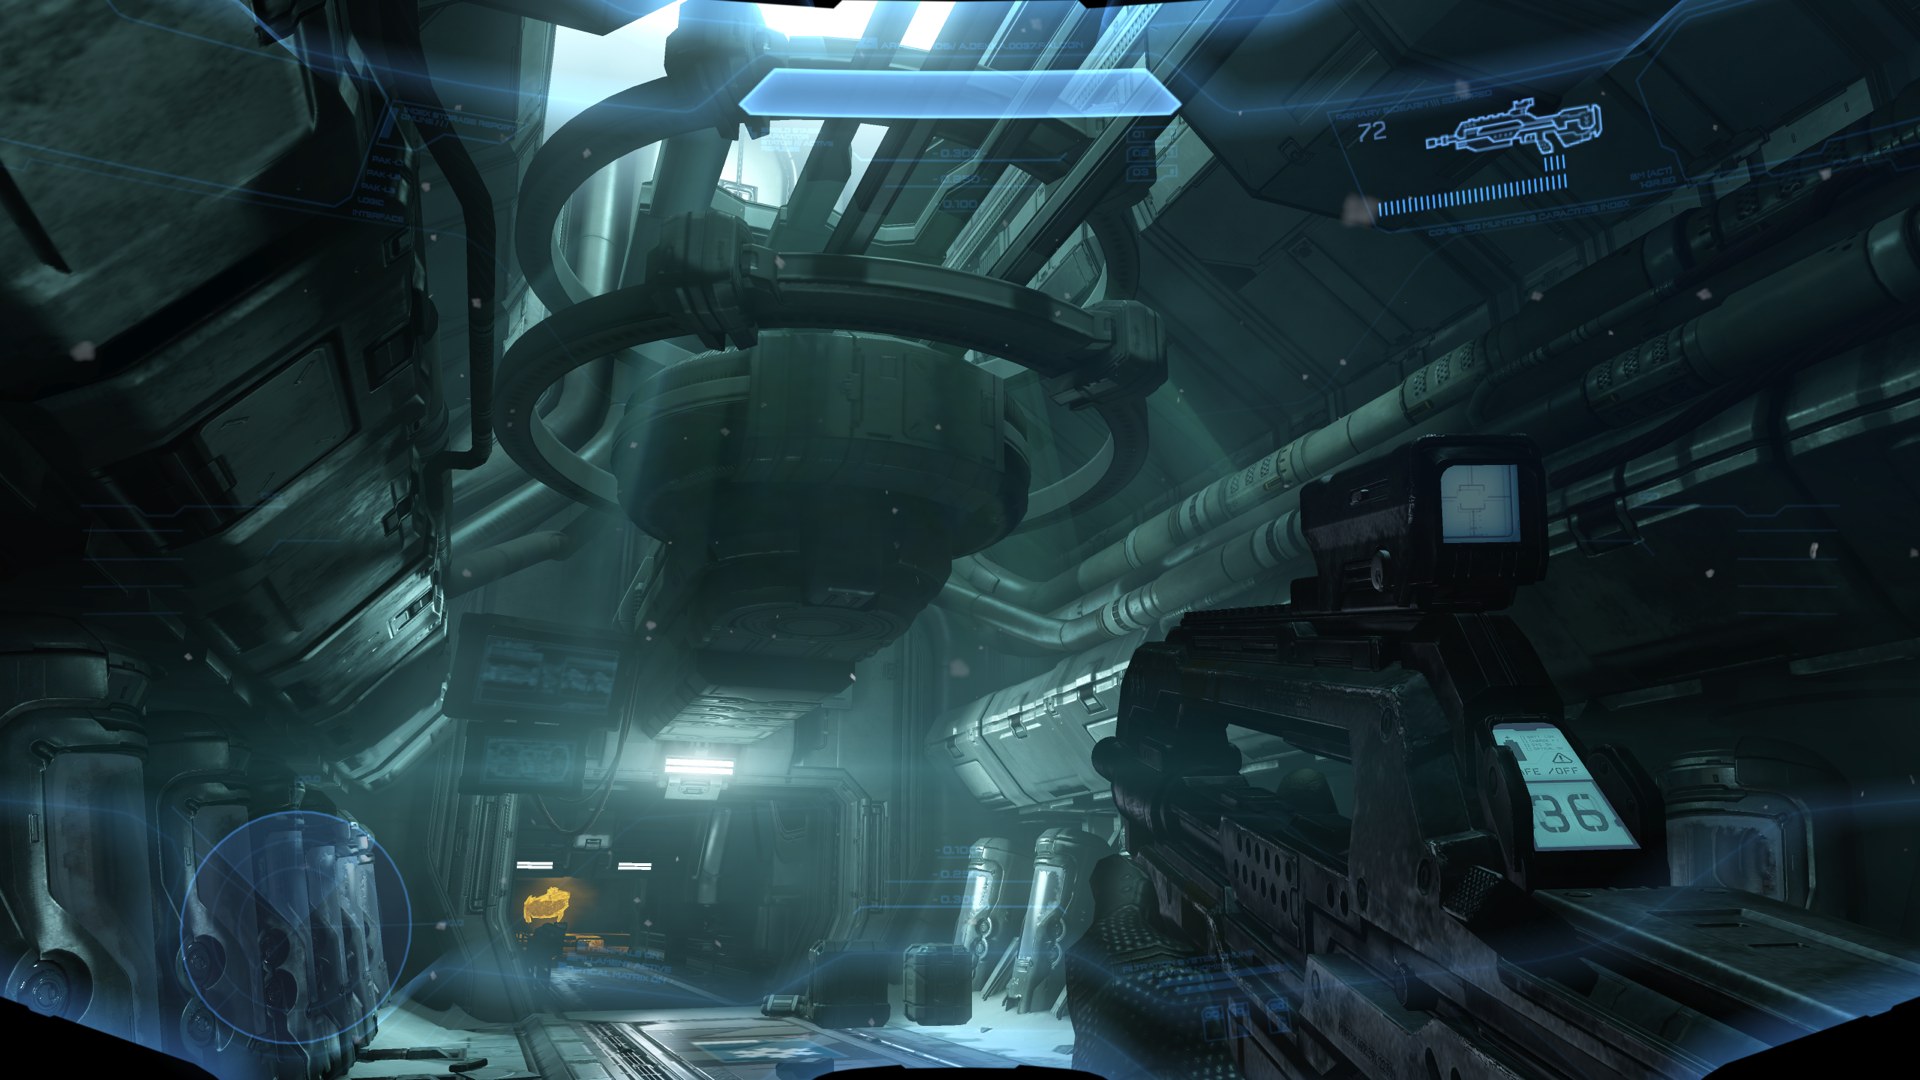 Media asset in full size related to 3dfxzone.it news item entitled as follows: Primi screenshot e artwork del first-person shooter Halo 4 | Image Name: news17066_21.jpg